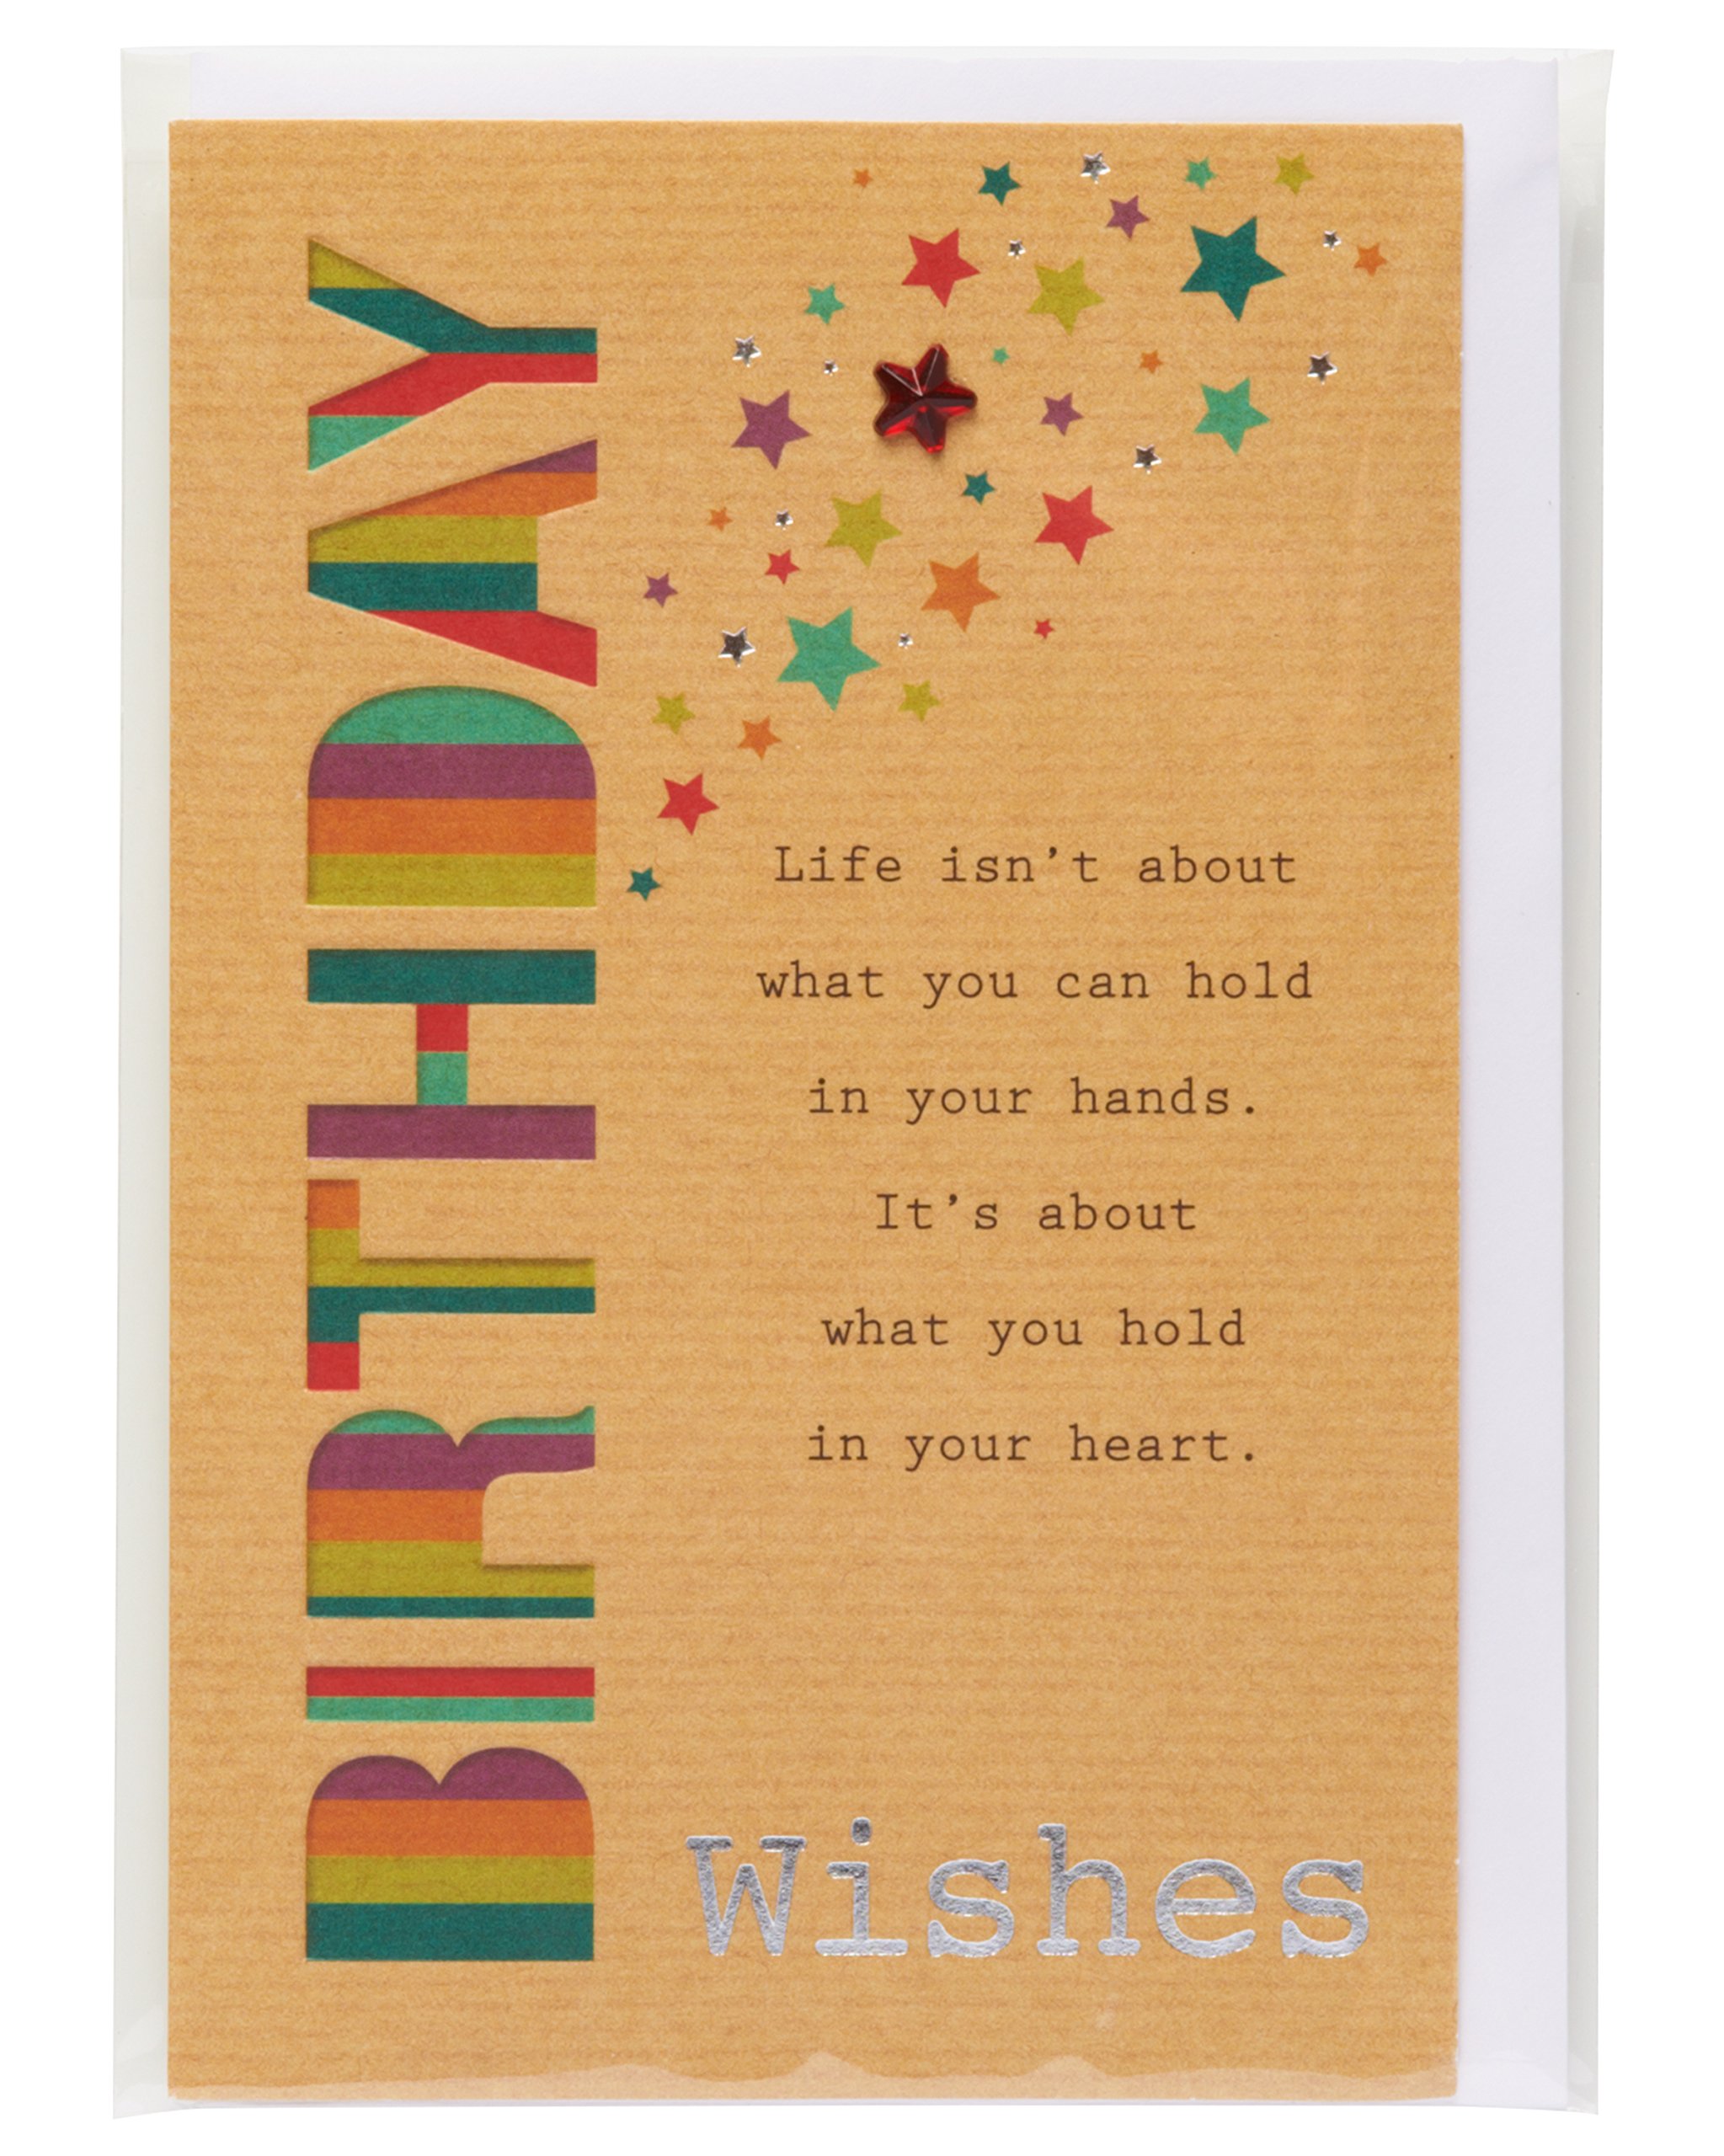 American Greetings Birthday Card (Wishes)